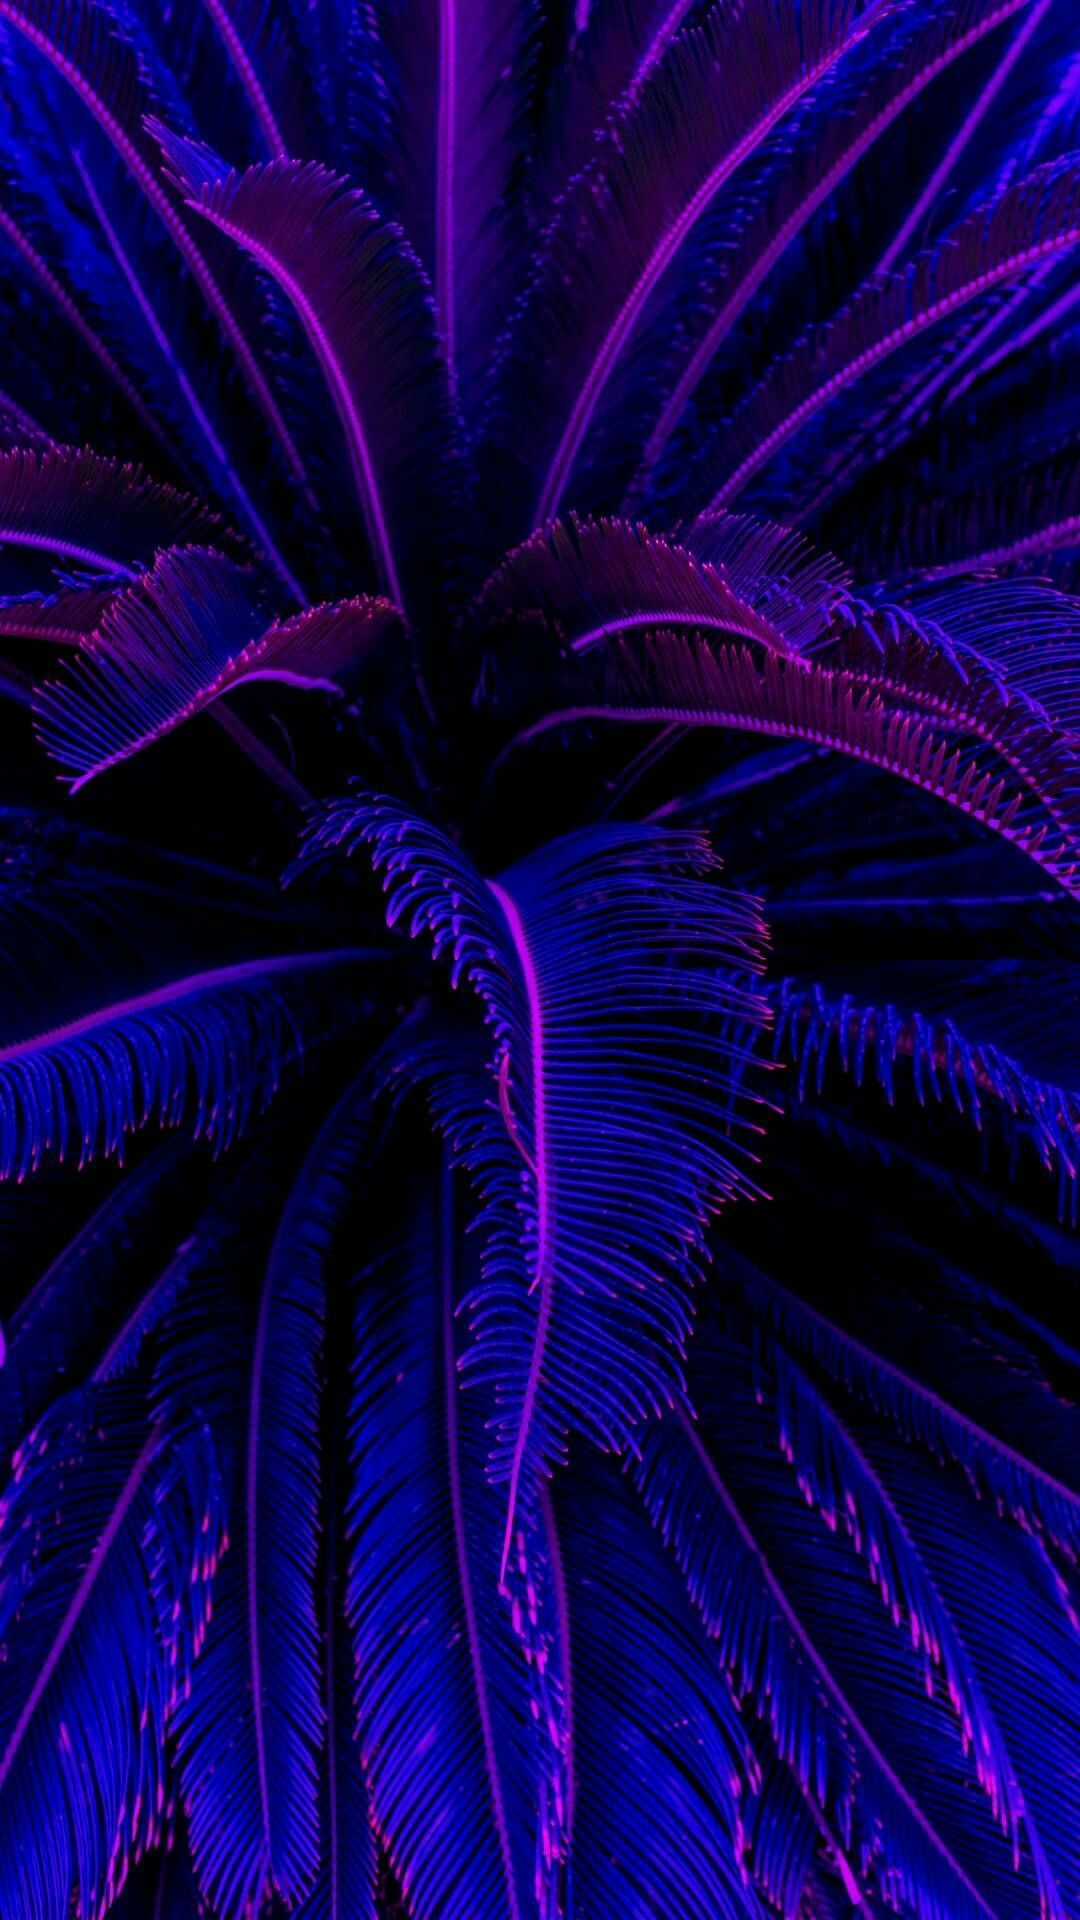 Android, Iphone, Desktop Hd Backgrounds / Wallpapers - Aesthetic Blue And Purple - HD Wallpaper 